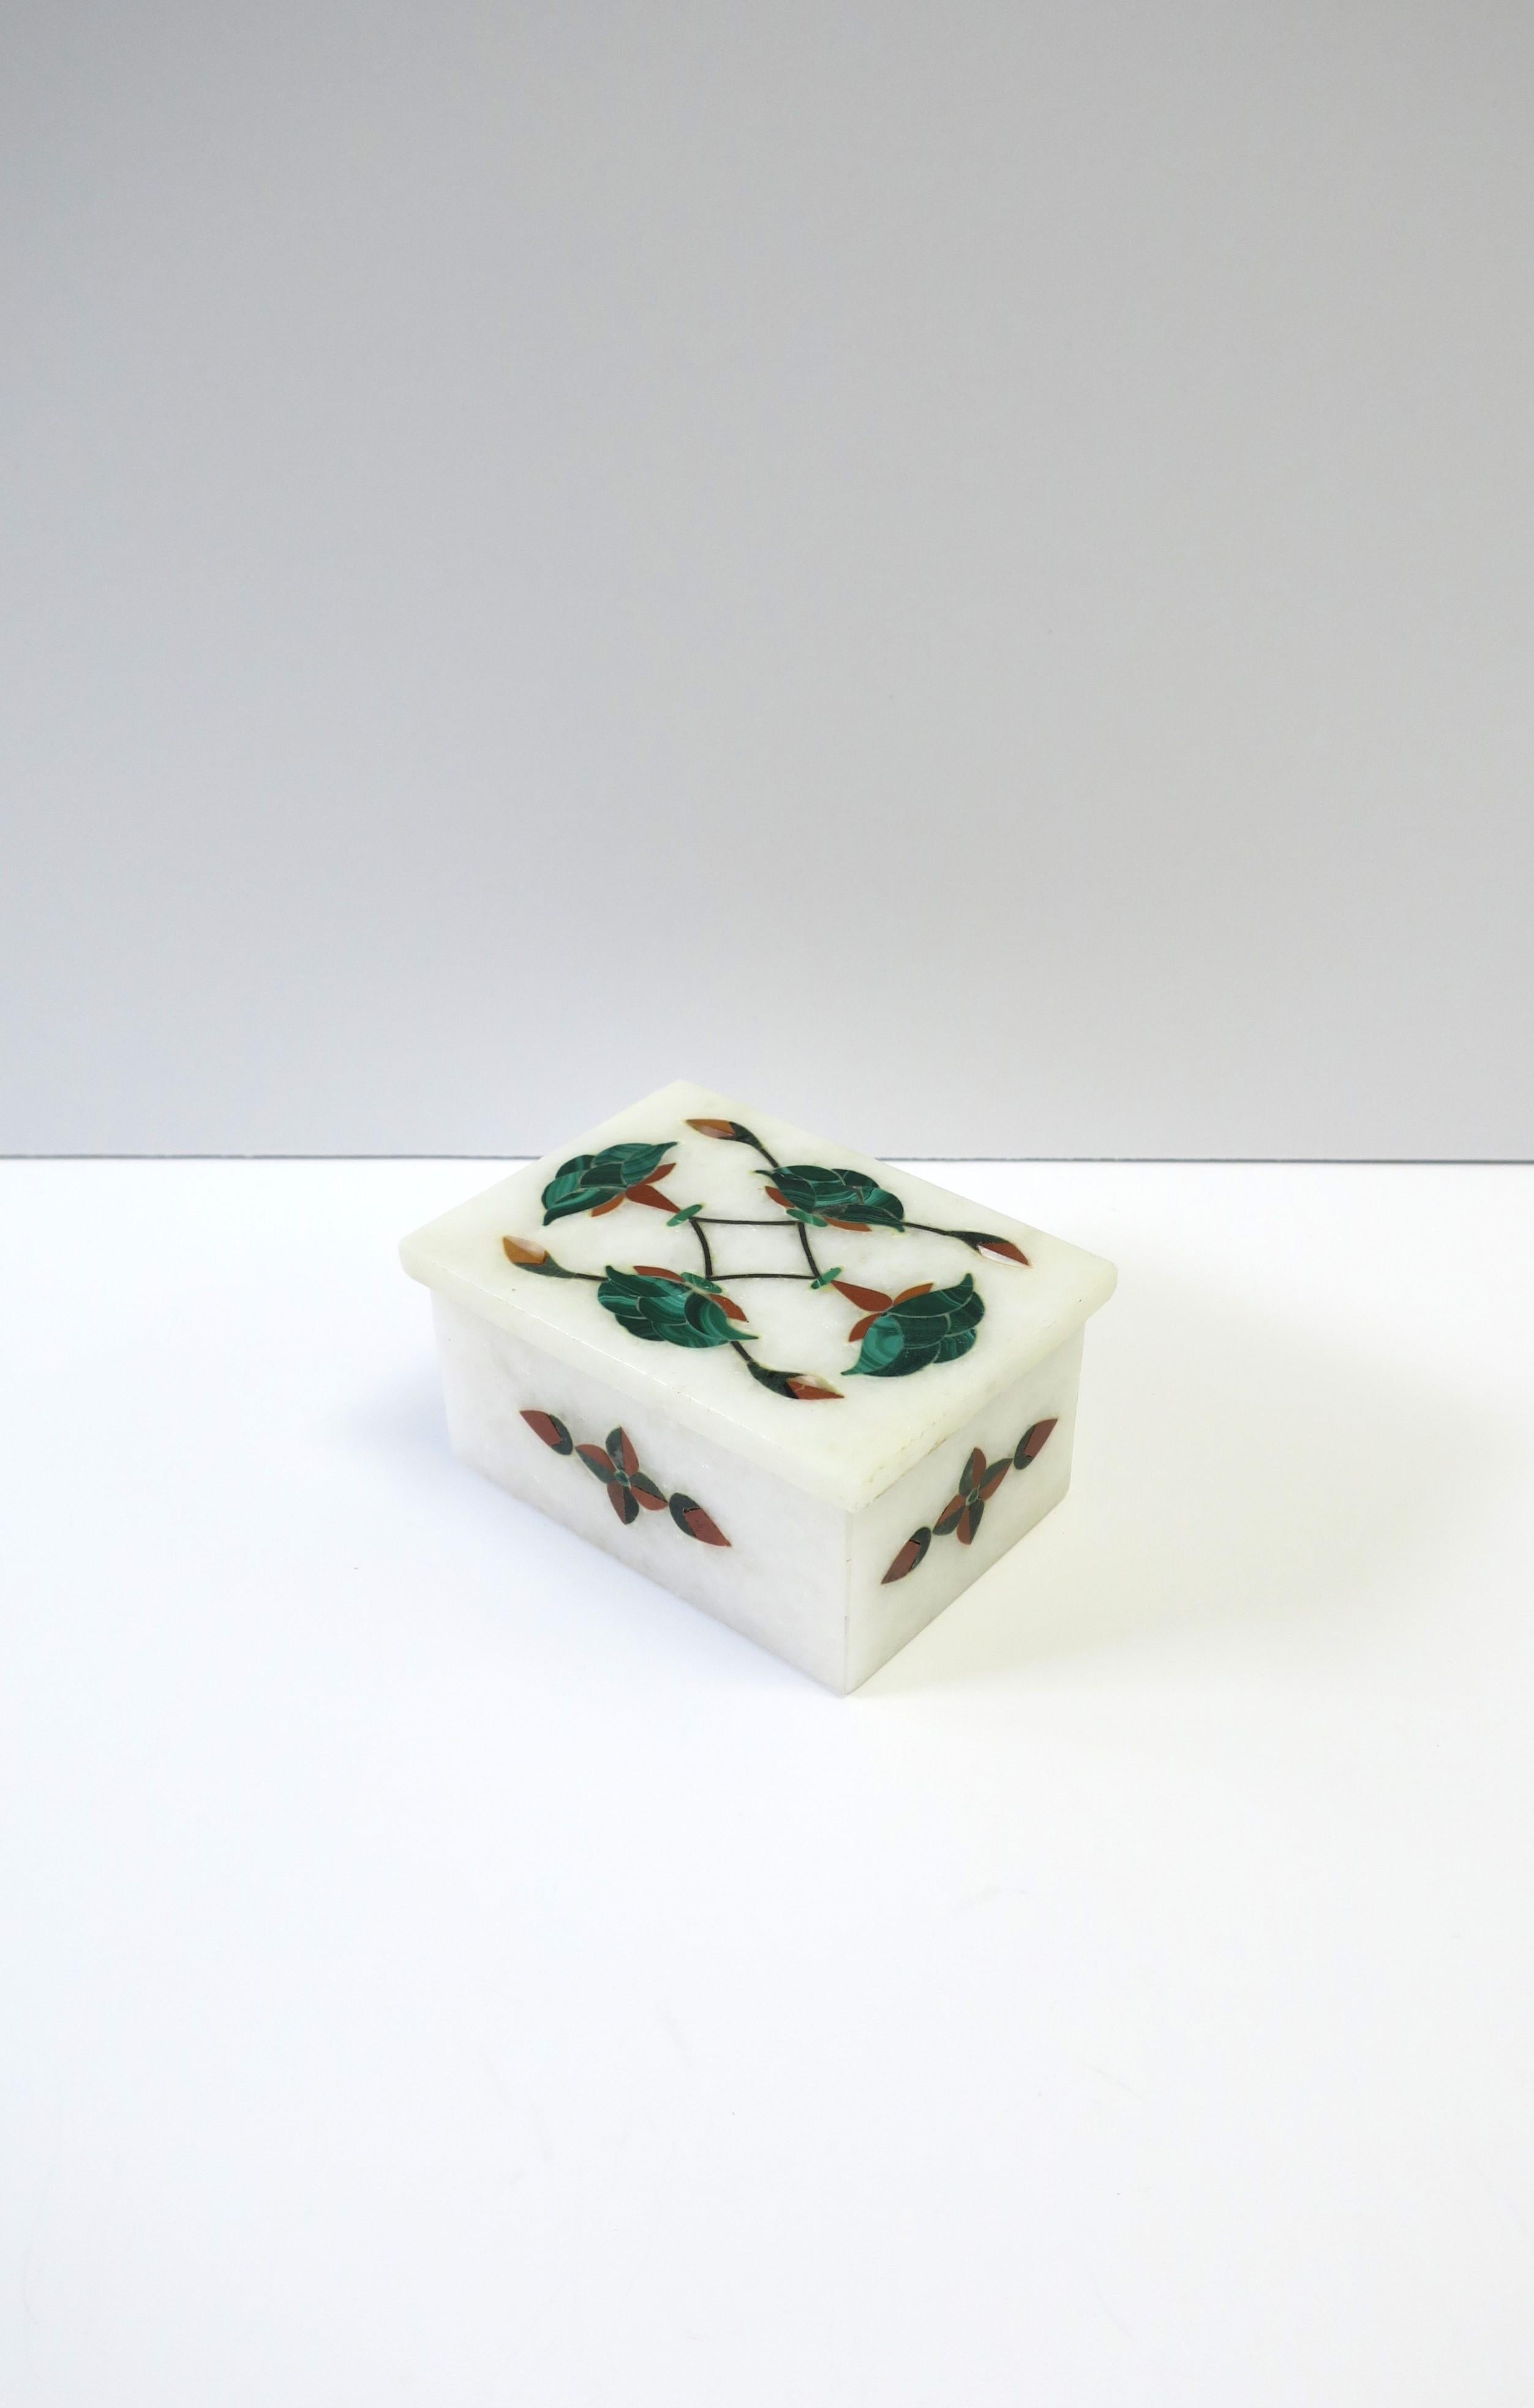 A Pietra Dura green malachite and granite marble stone inlayed decorative or jewelry box, circa 20th century. Box is white granite marble with green malachite and white mother of pearl shell flower and leaf inlayed design. Hand-carved. Hand-crafted.